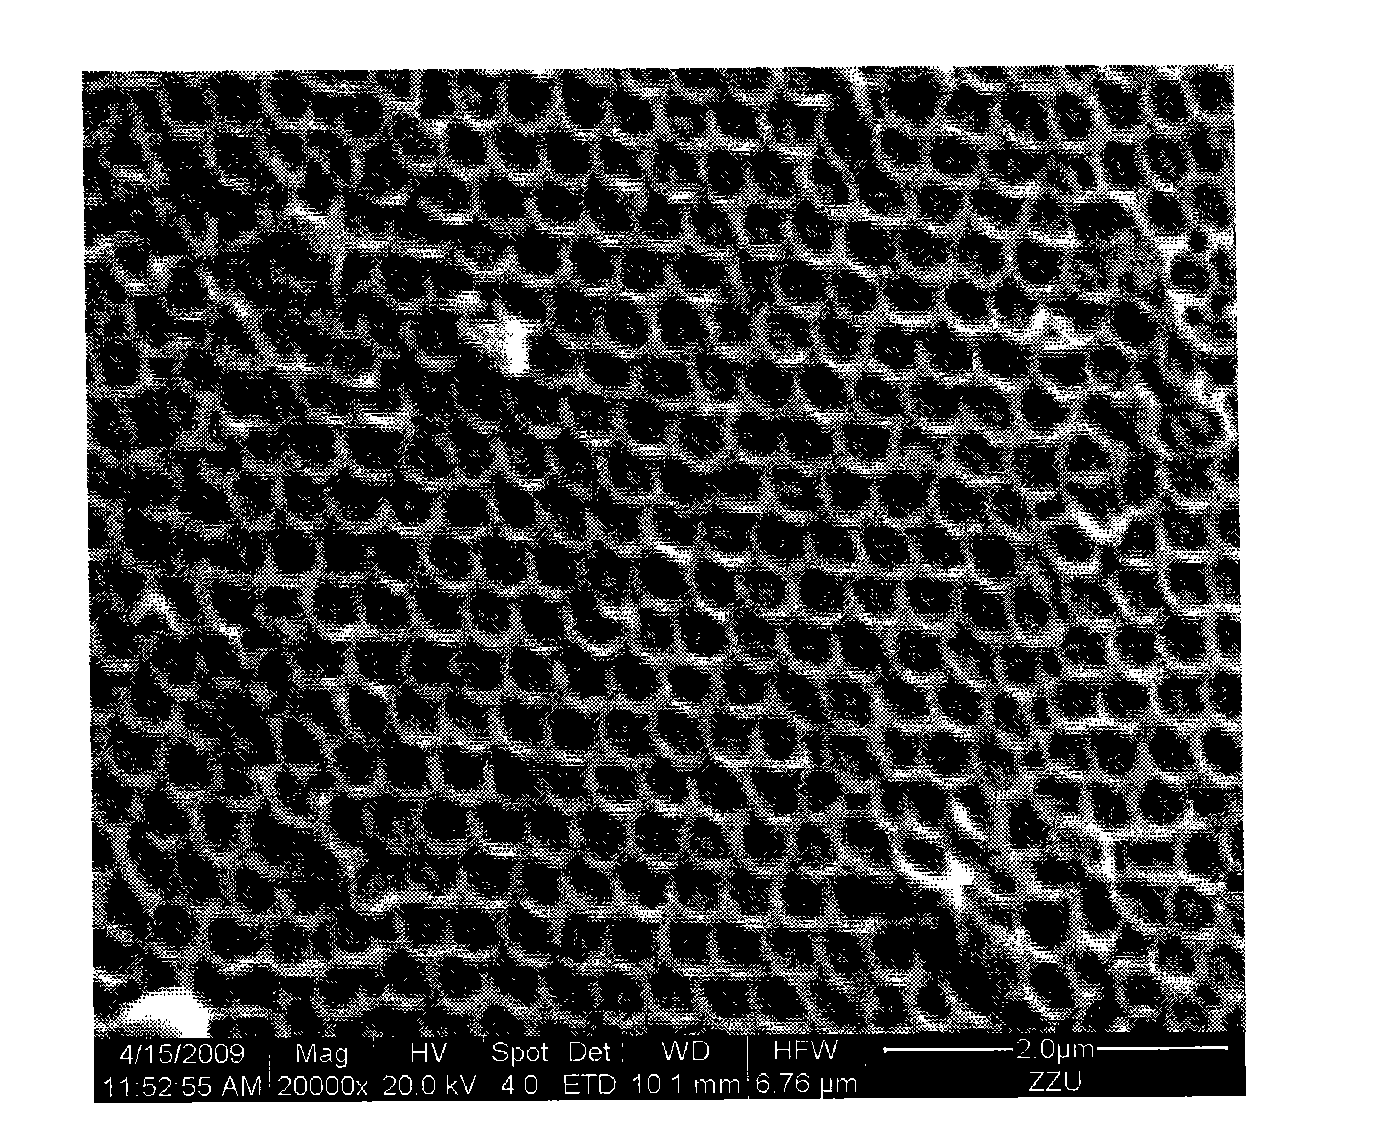 Method for self assembling non-spherical polystyrene grains to form into multihole and ordered structure